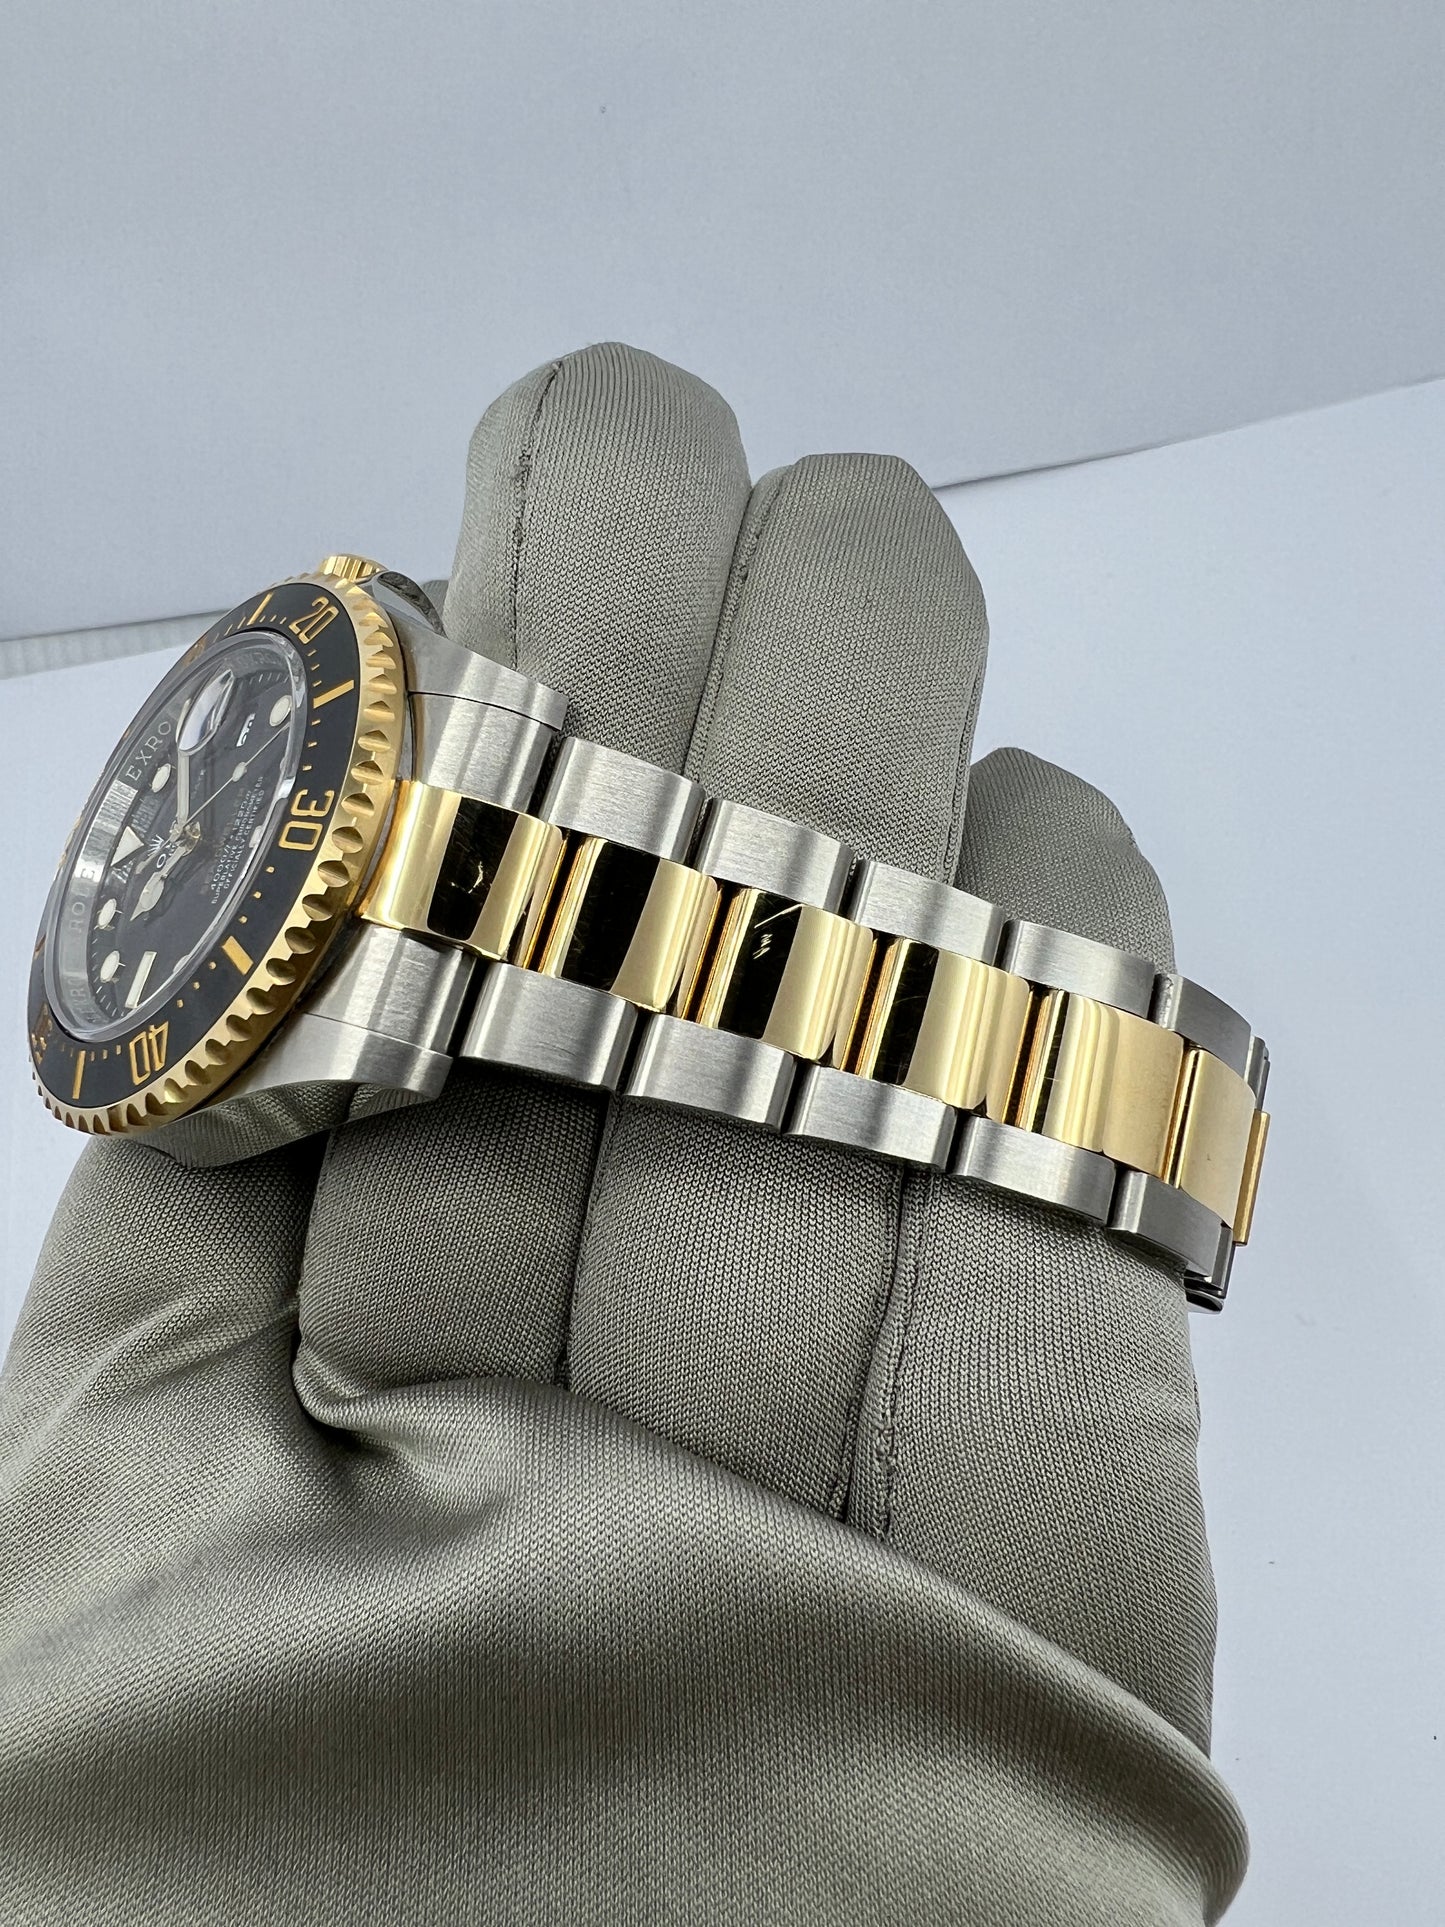 Pre-owned Rolex Sea-Dweller, Stainless Steel and 18k Yellow Gold, 43mm, Ref# 126603-0001